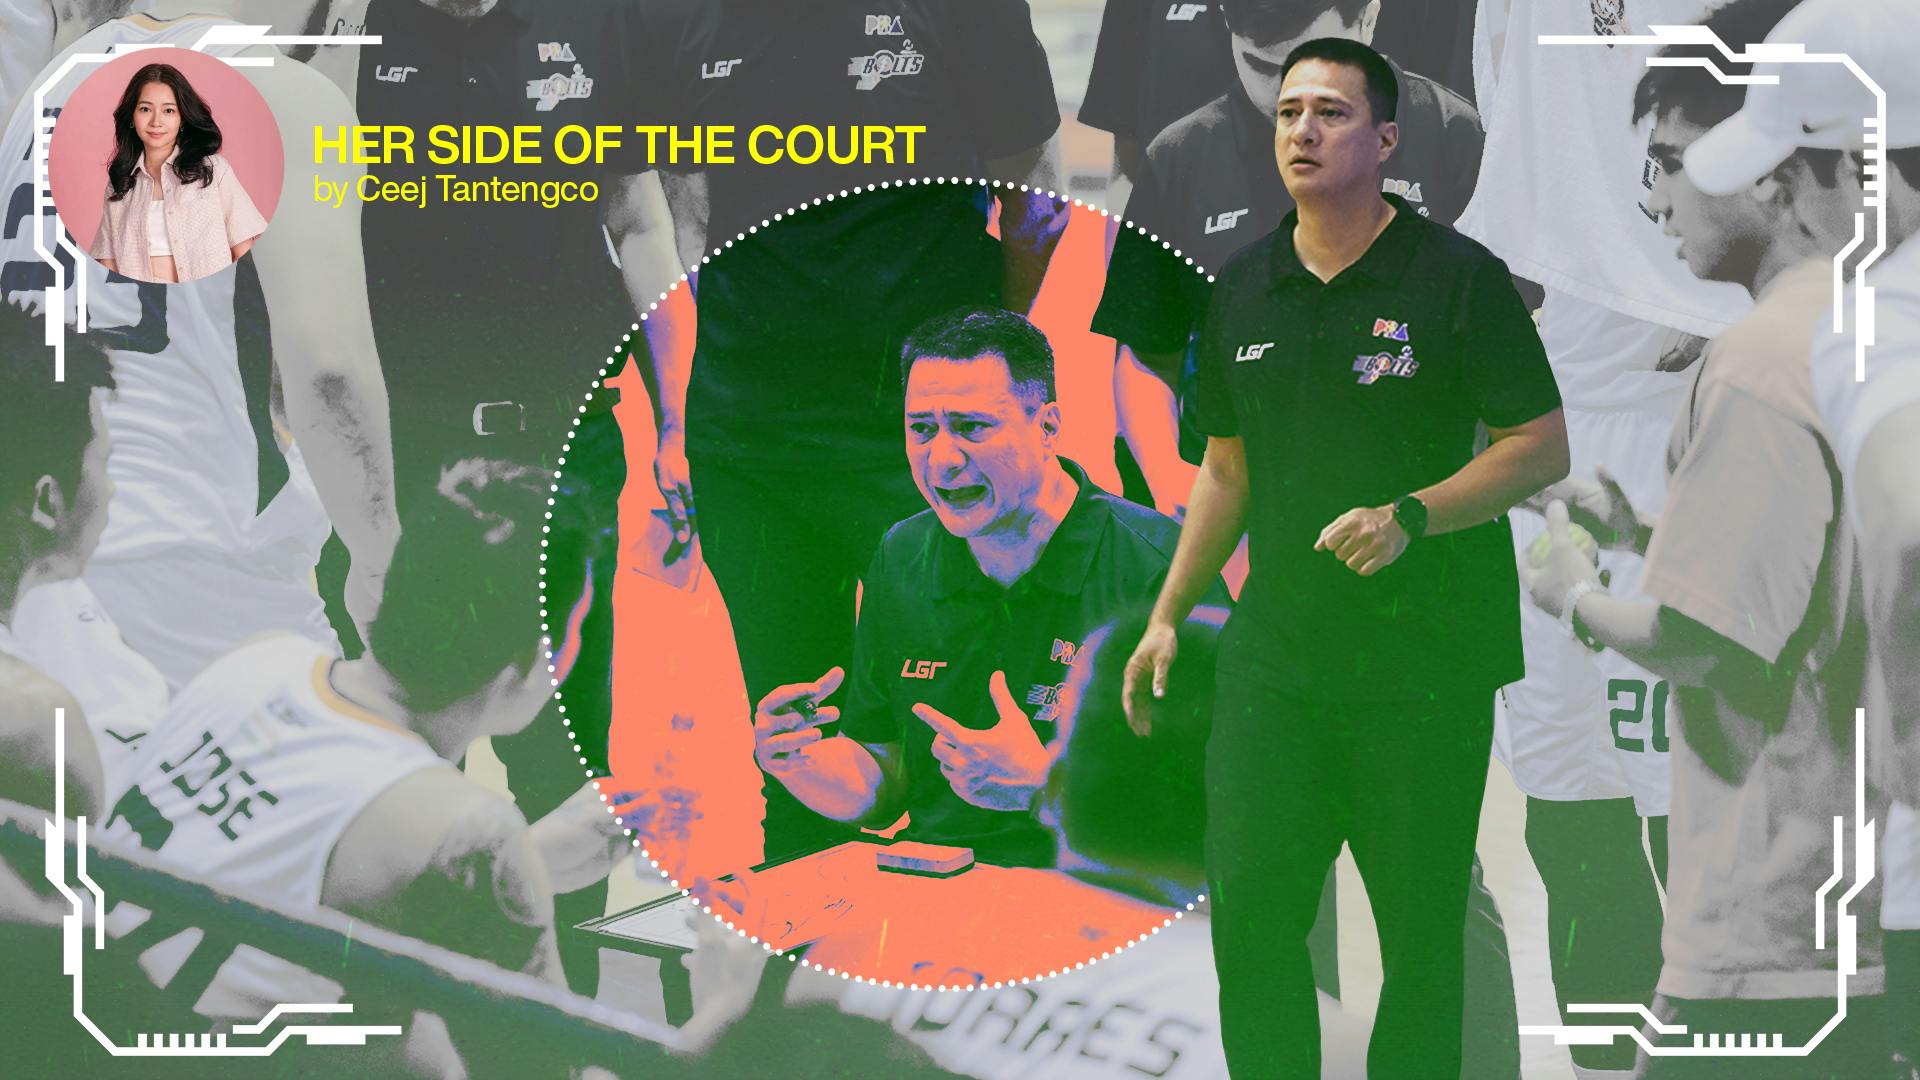 HER SIDE OF THE COURT | Professionalism with compassion: Luigi Trillo shares vision for Meralco